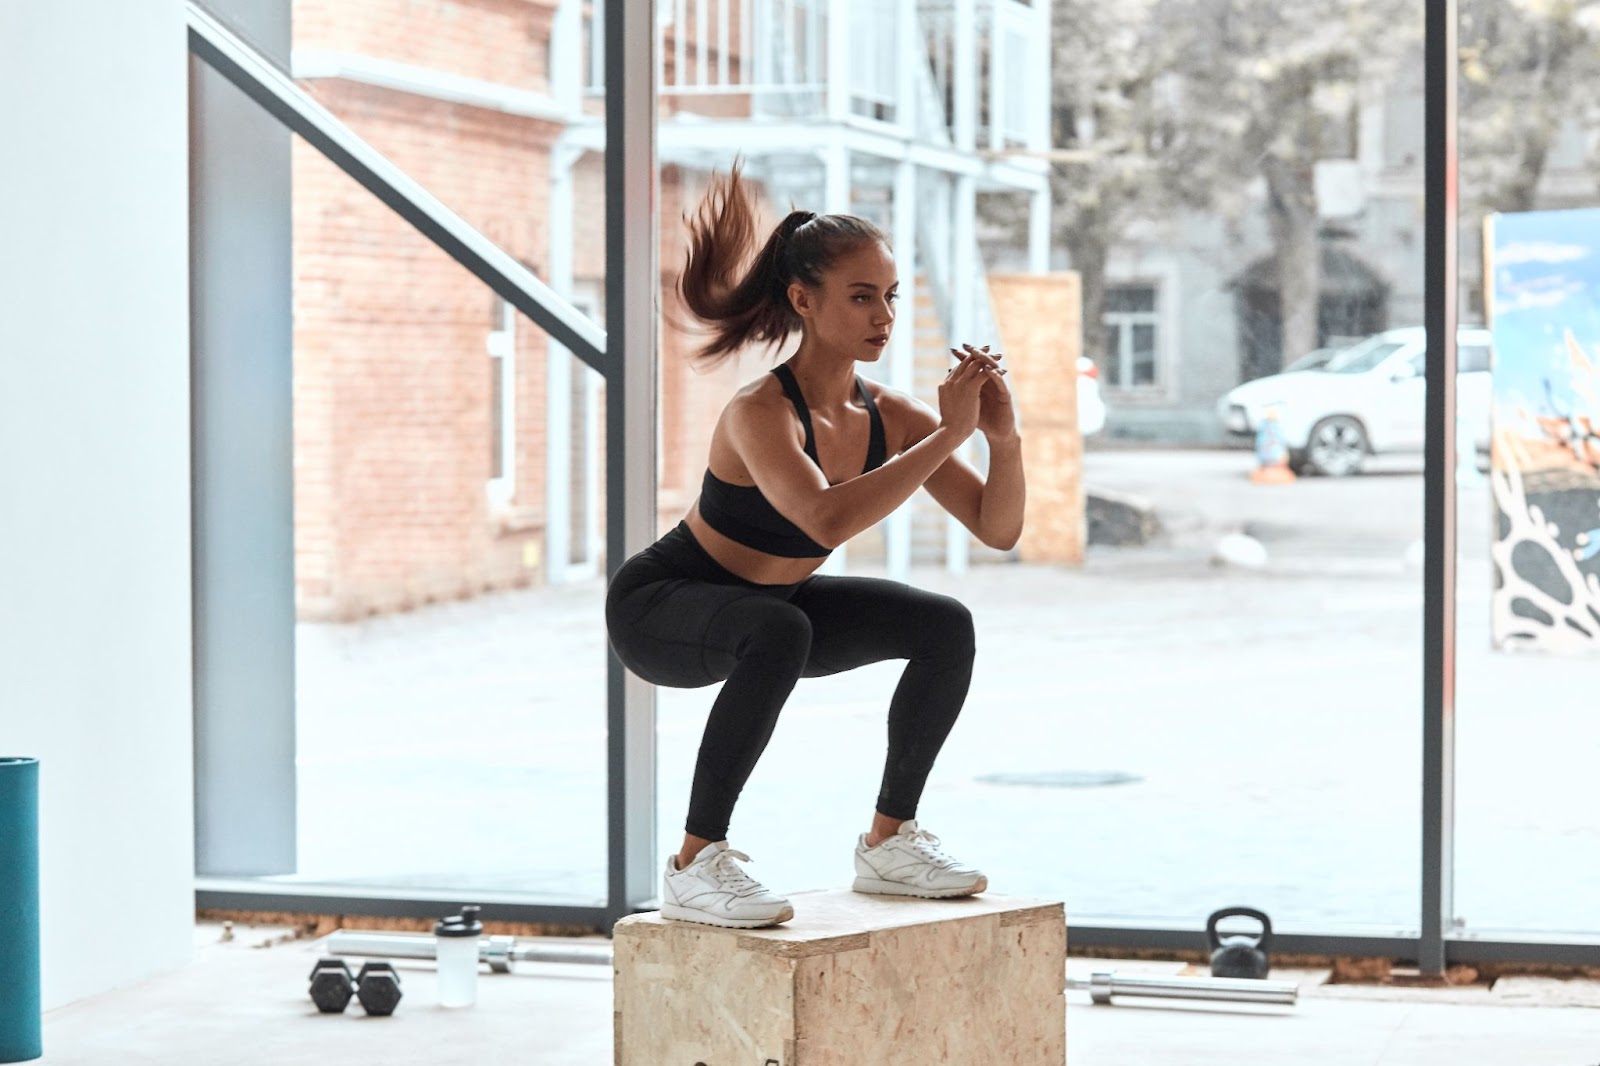 Fit young woman doing a jumping squat Boot Camp exercise